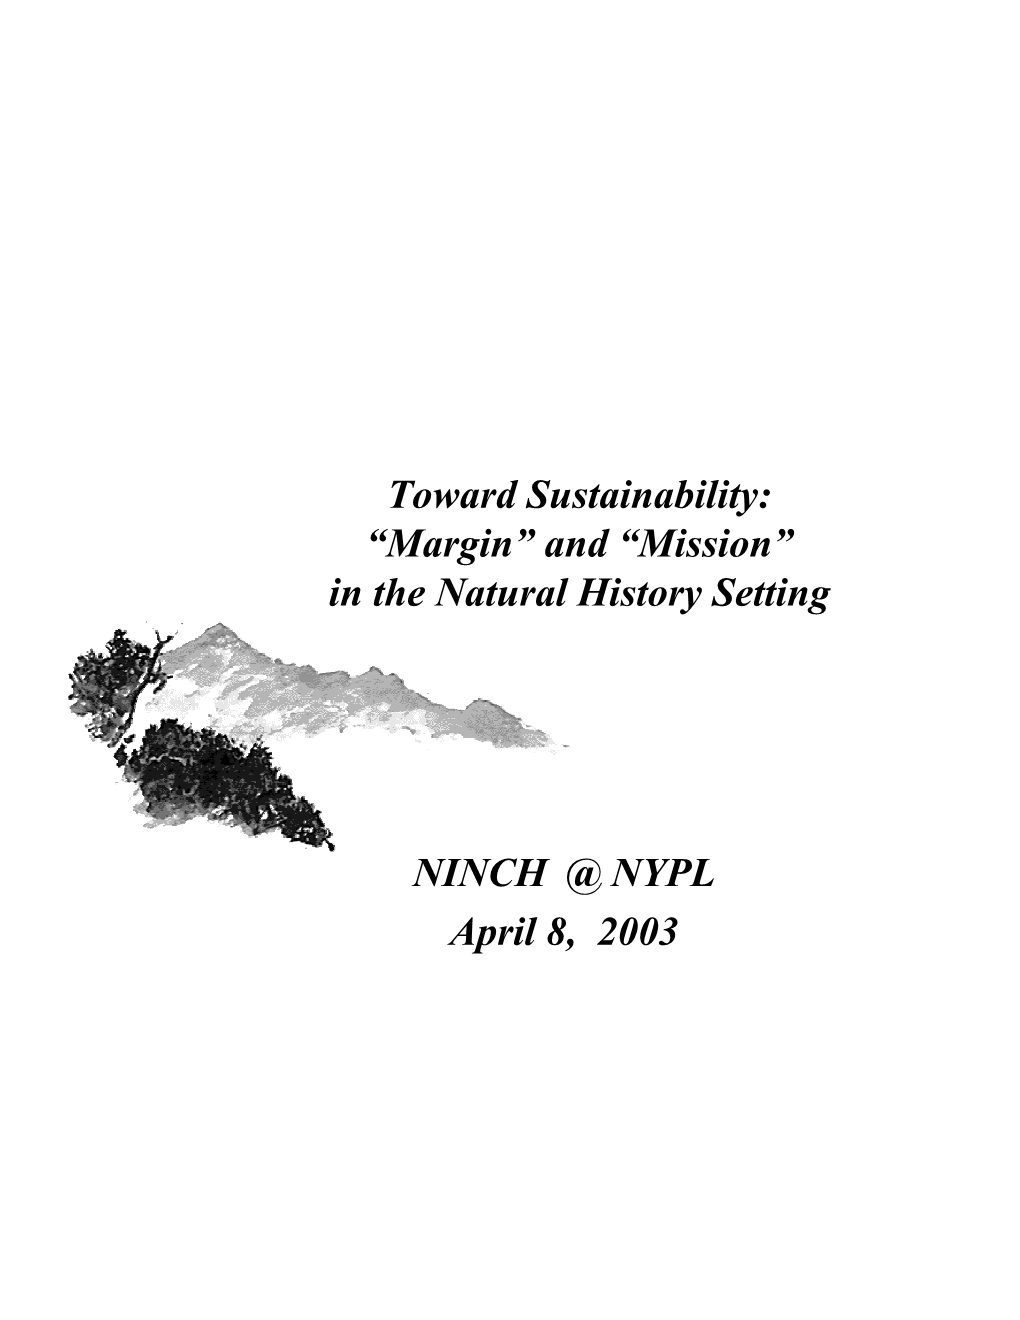 Toward Sustainability: “Margin” and “Mission” in the Natural History Setting